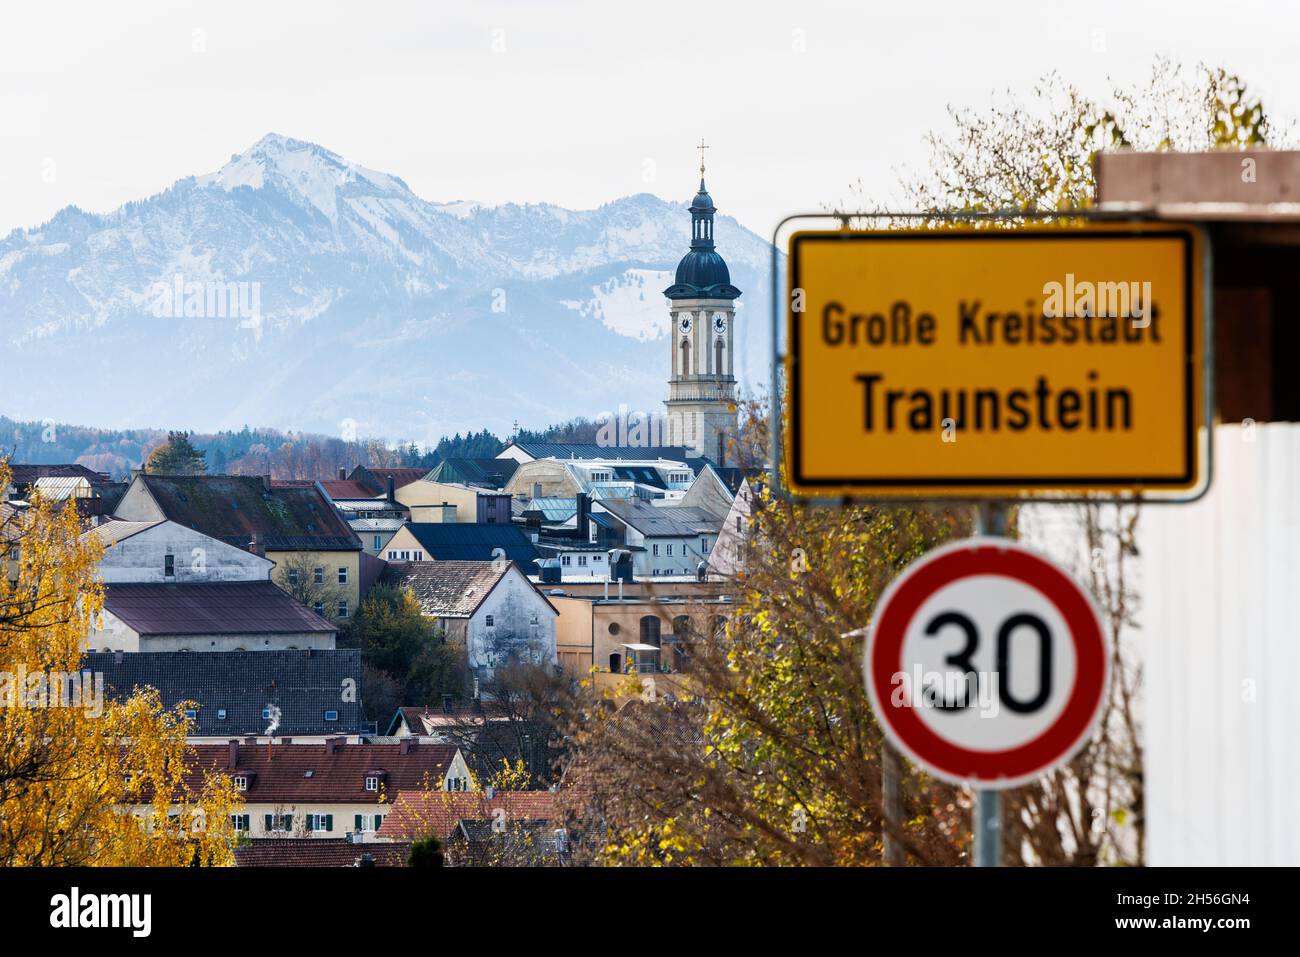 07 November 2021, Bavaria, Traunstein: The parish church of St. Oswald and the Bavarian foothills of the Alps can be seen behind the town sign 'Große Kreisstadt Traunstein'. The district of Traunstein is currently one of the Bavarian regions most affected by Corona. Photo: Matthias Balk/dpa Stock Photo